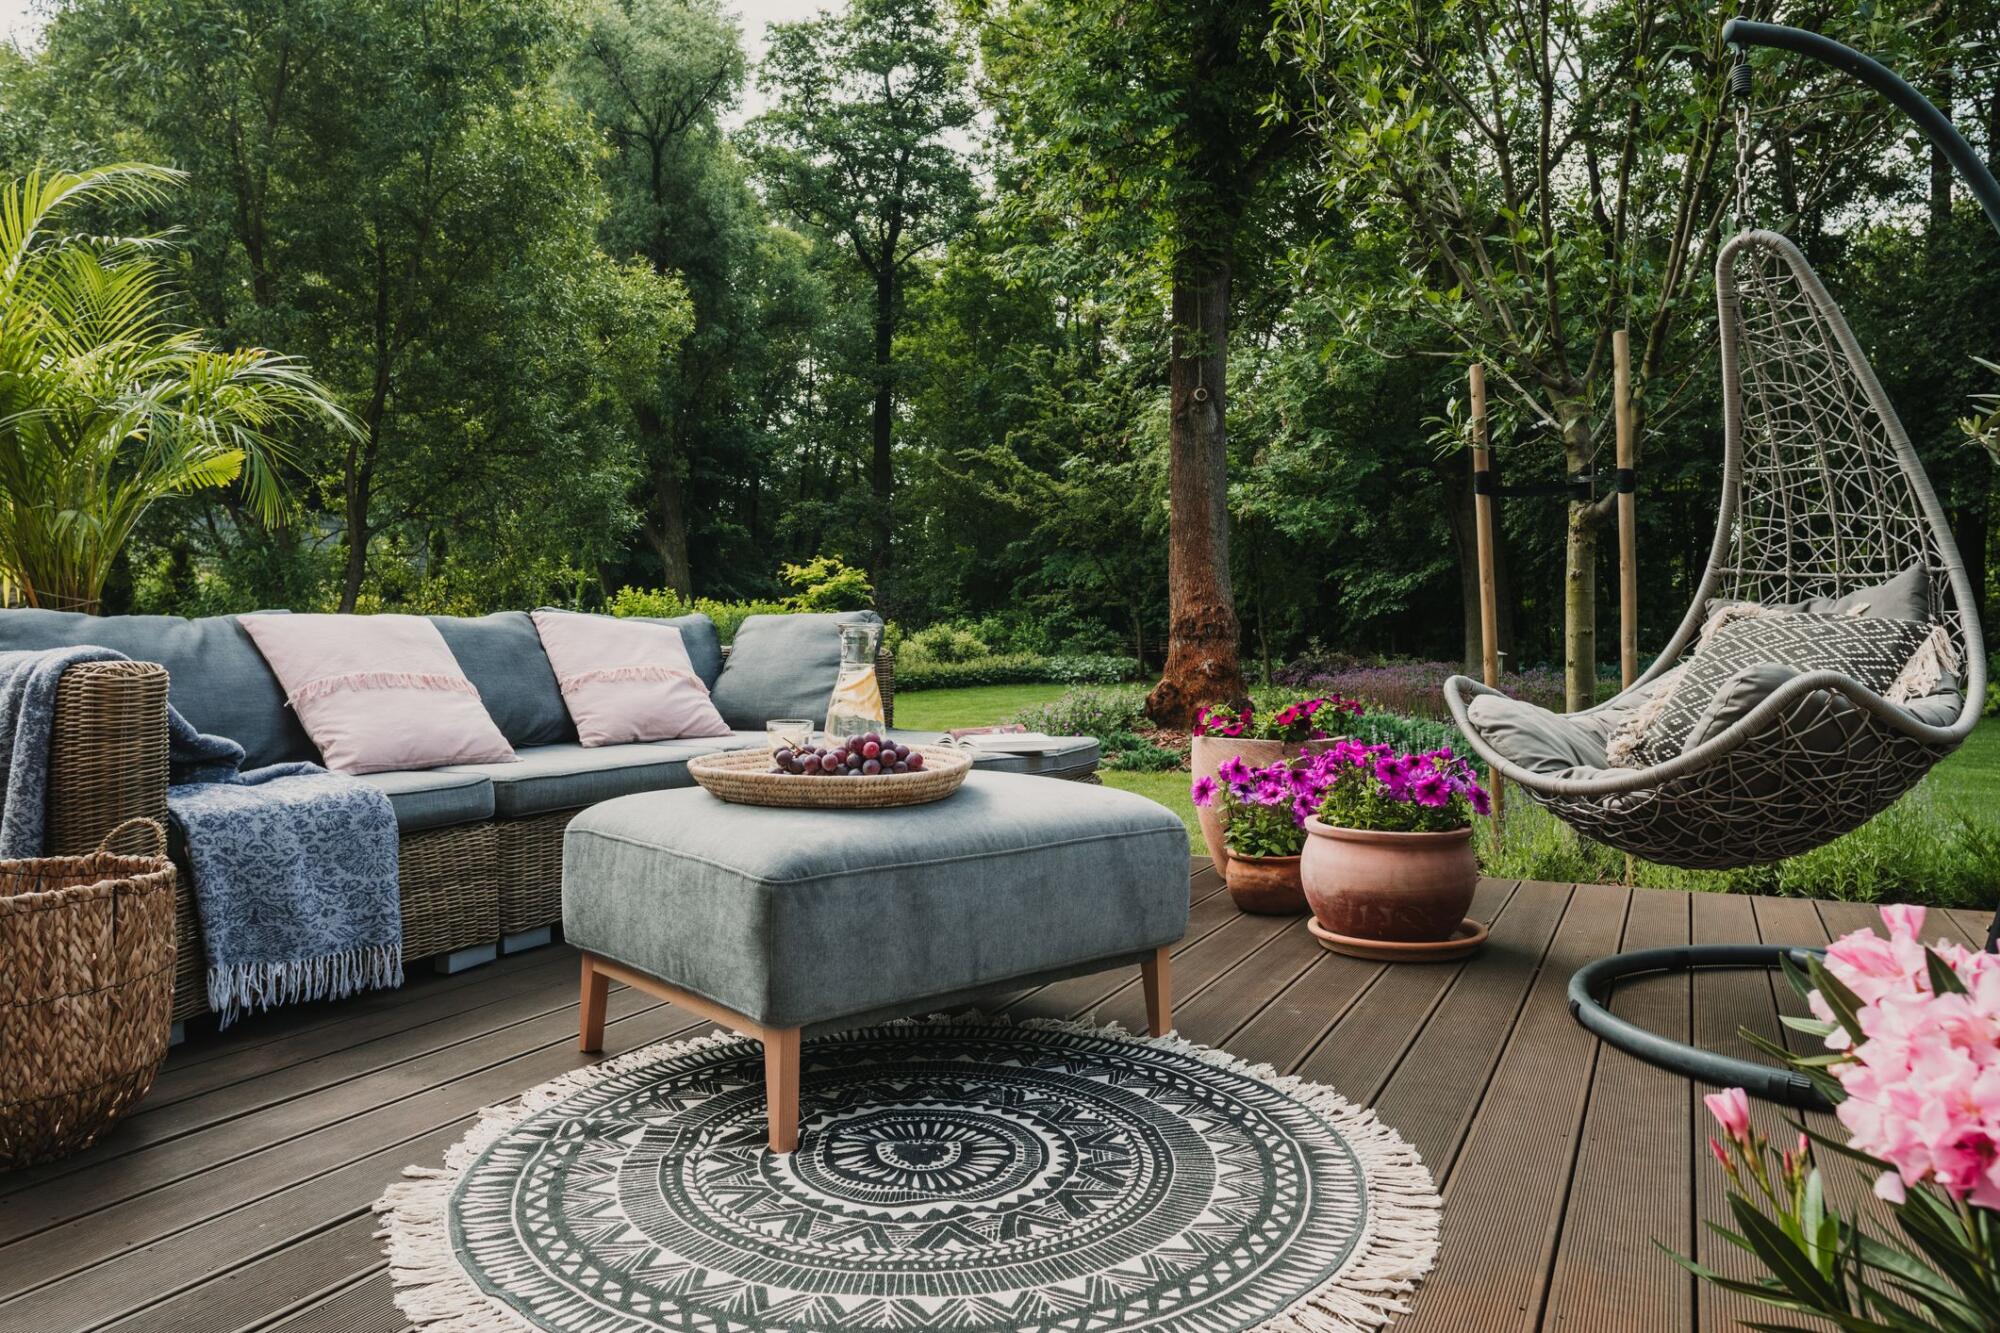 A wooden deck with a hanging sofa and a rug, perfect for a patio.